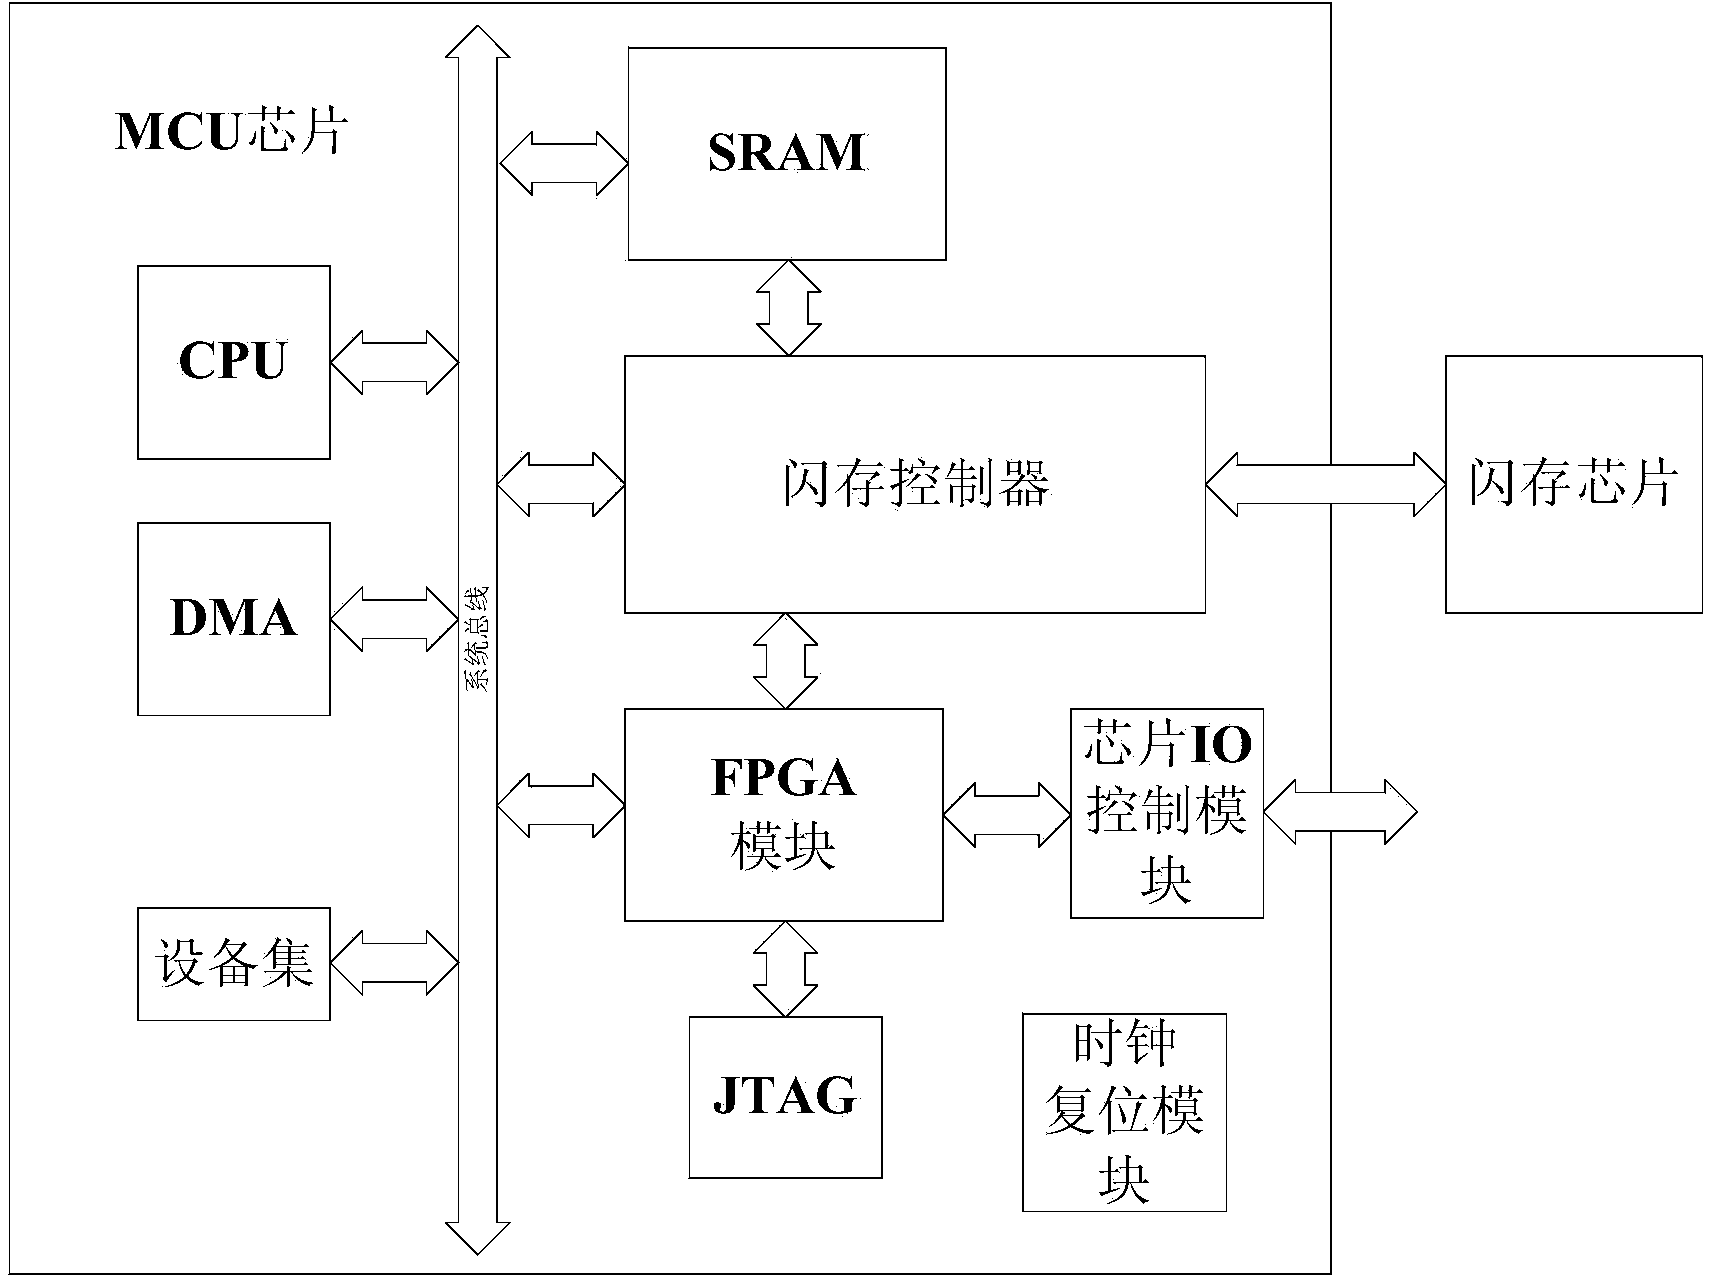 Method and device for operation of FPGA (Field Programmable Gate Array) in MCU (Microprogrammed Control Unit) chip